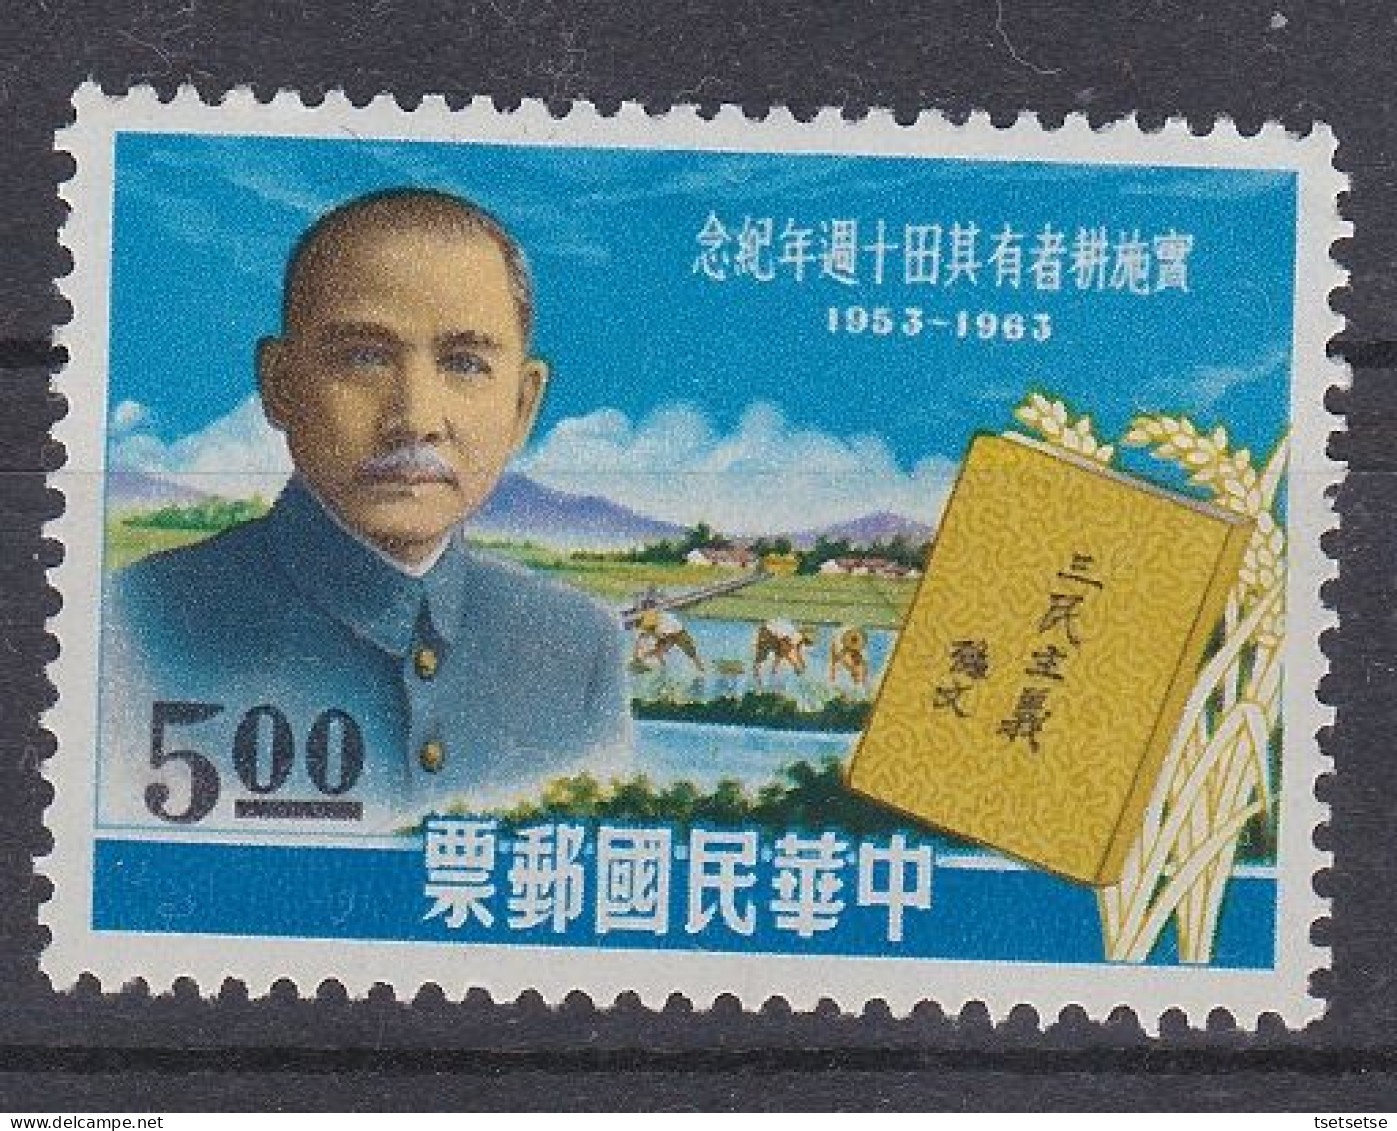 $85 CV! 1963 RO China Taiwan Land To The Tillers Stamp Set, #1383, Mint Unused VF H OG + Mint #C61 - Nuevos